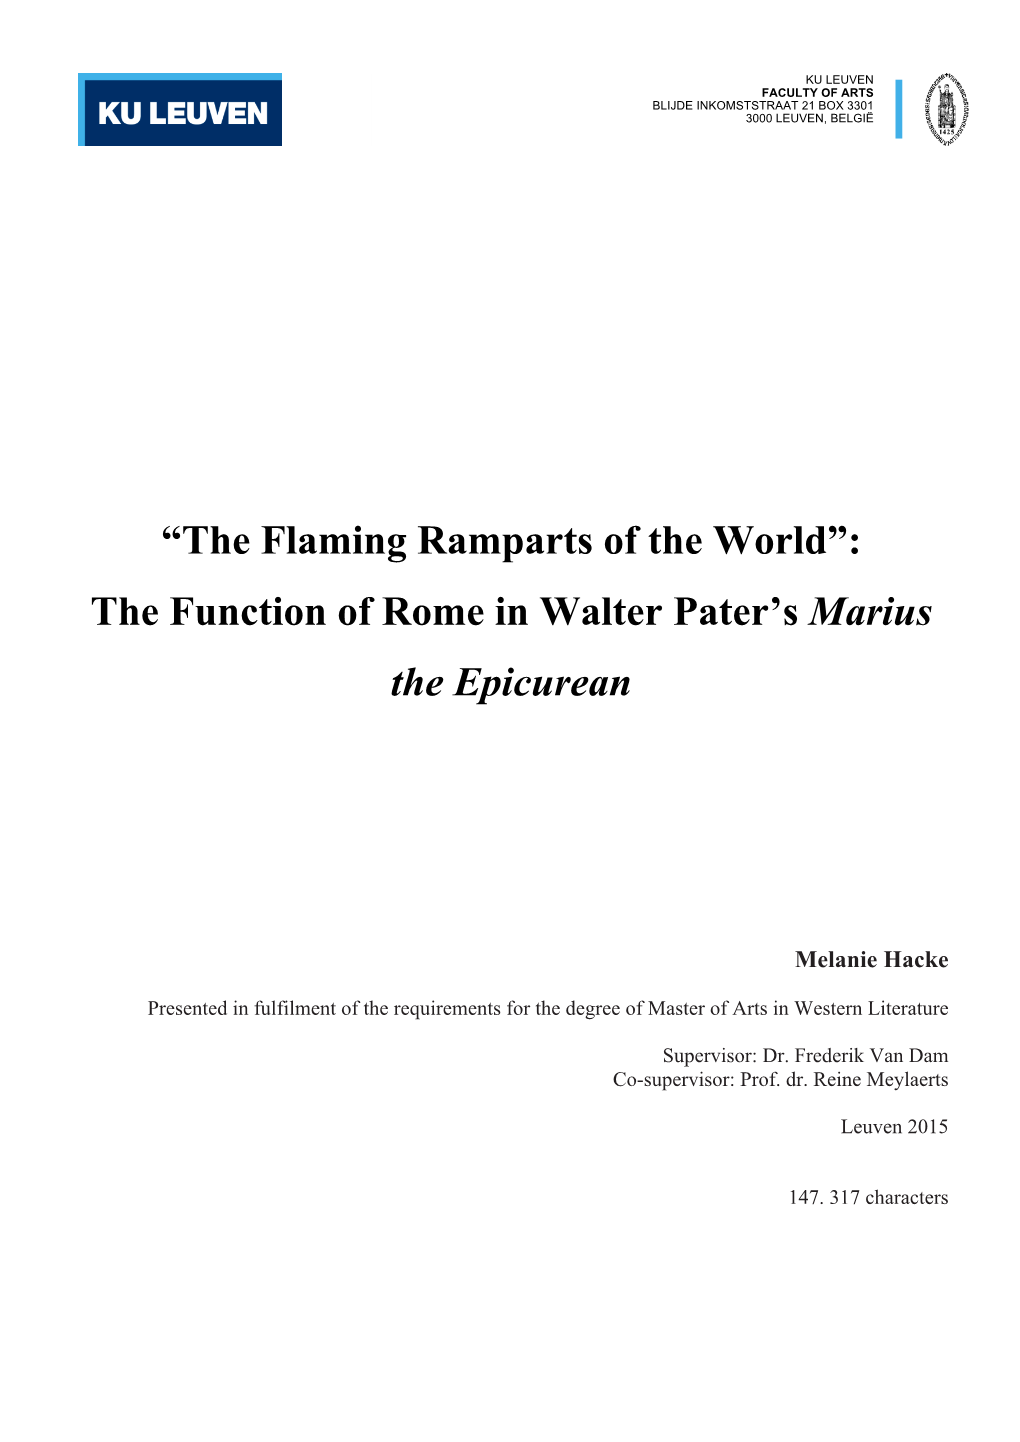 The Flaming Ramparts of the World”: the Function of Rome in Walter Pater’S Marius the Epicurean